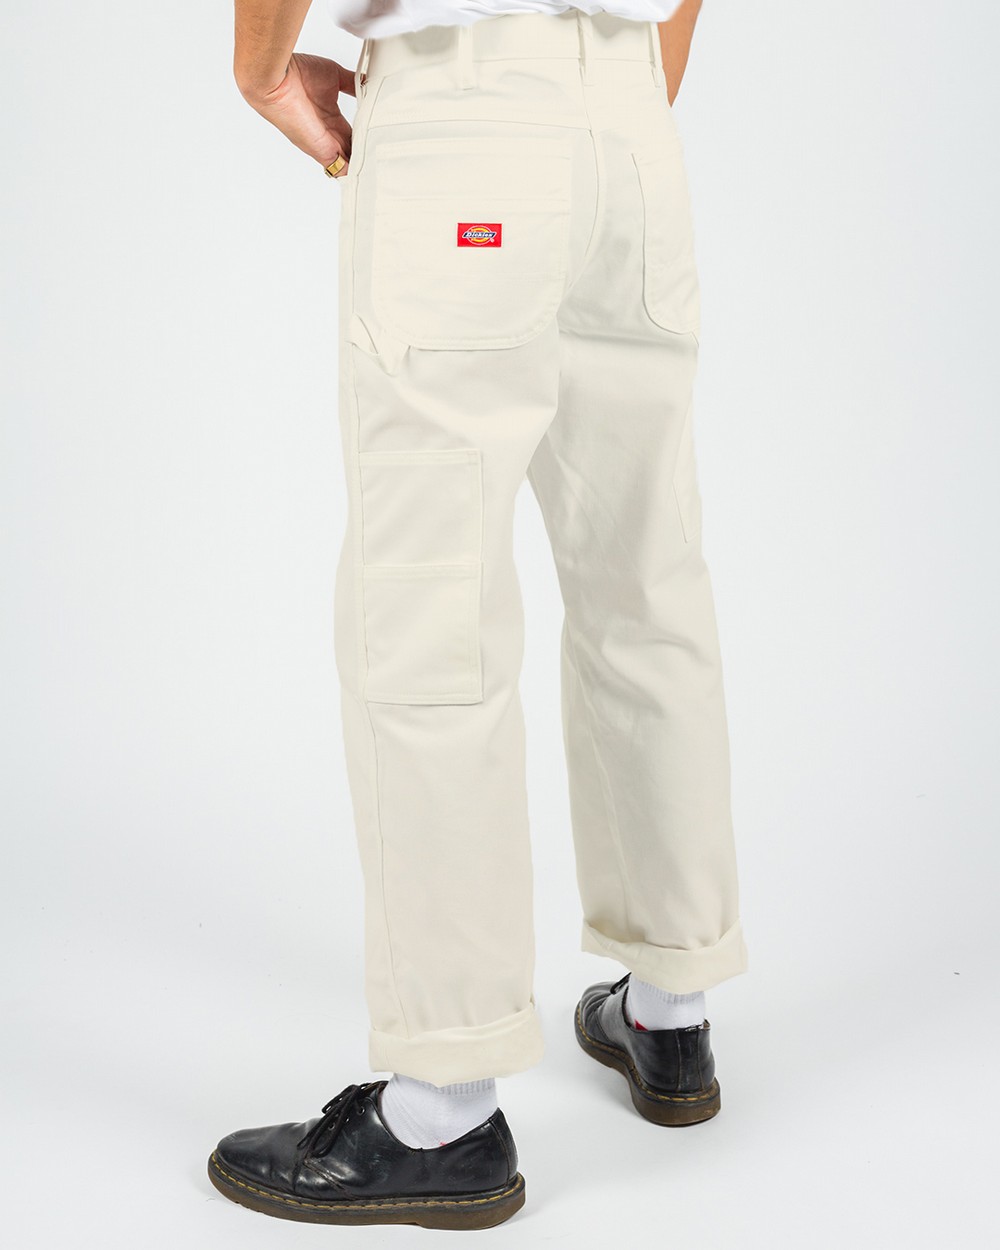 relaxed fit straight leg cotton painter's pants